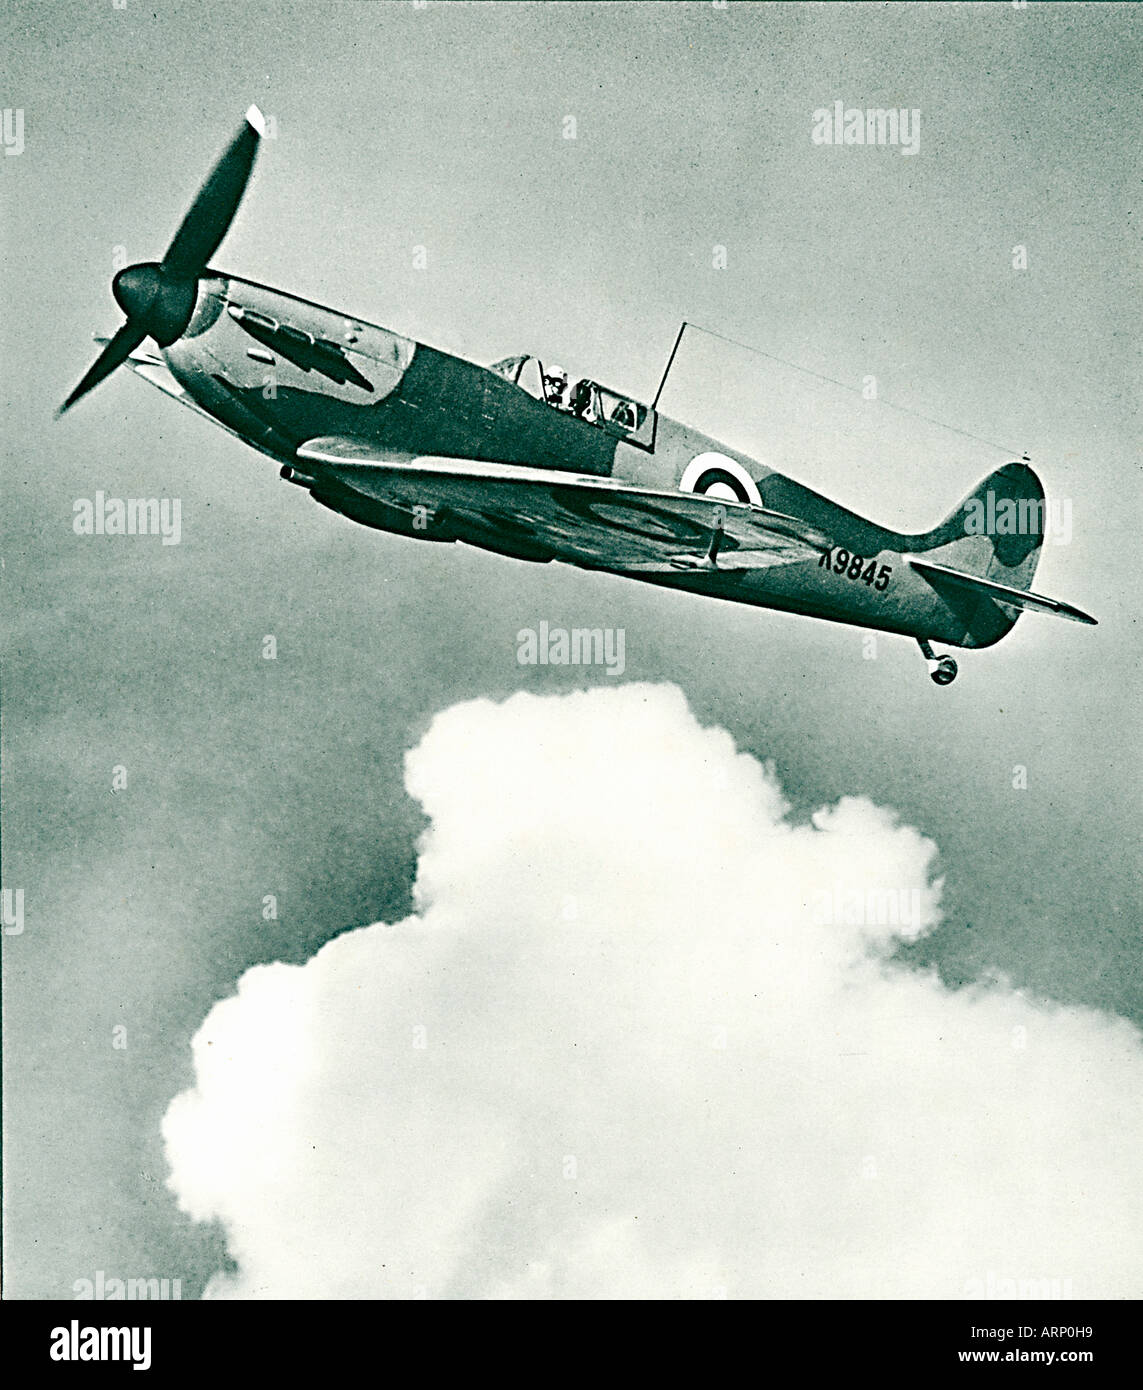 Spitfire 1939 photo of the iconic English fighter plane designed by Reginald Mitchell flying solo Stock Photo